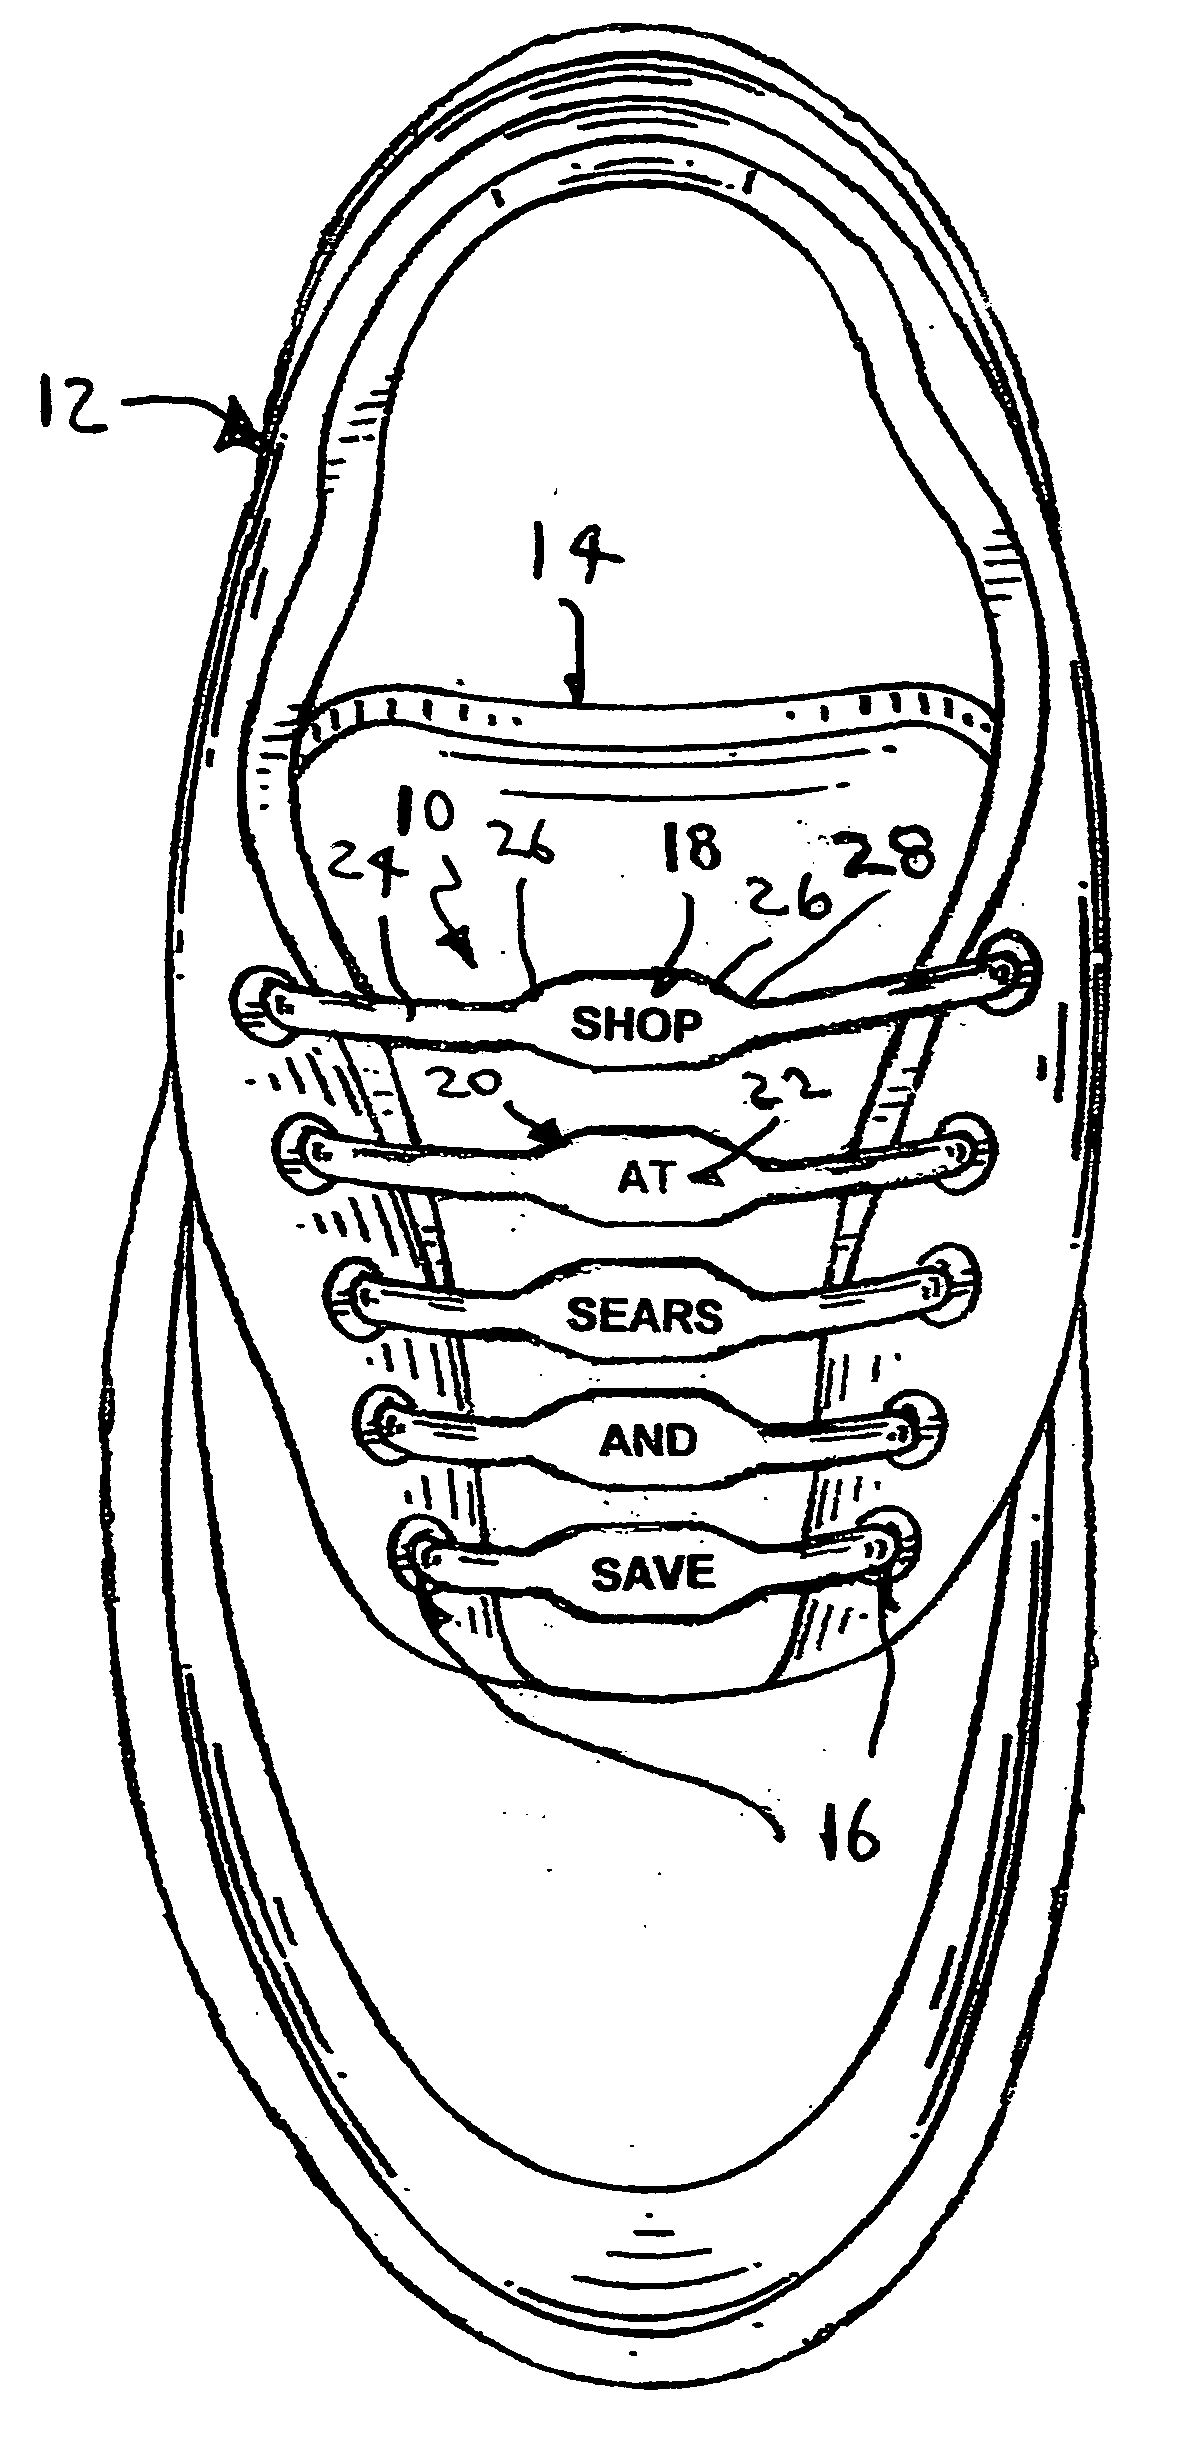 Lace for a shoe having a tongue and horizontal pairs of shoelace holes and for displaying a message over the tongue of the shoe and between the horizontal pairs of shoelace holes of the shoe